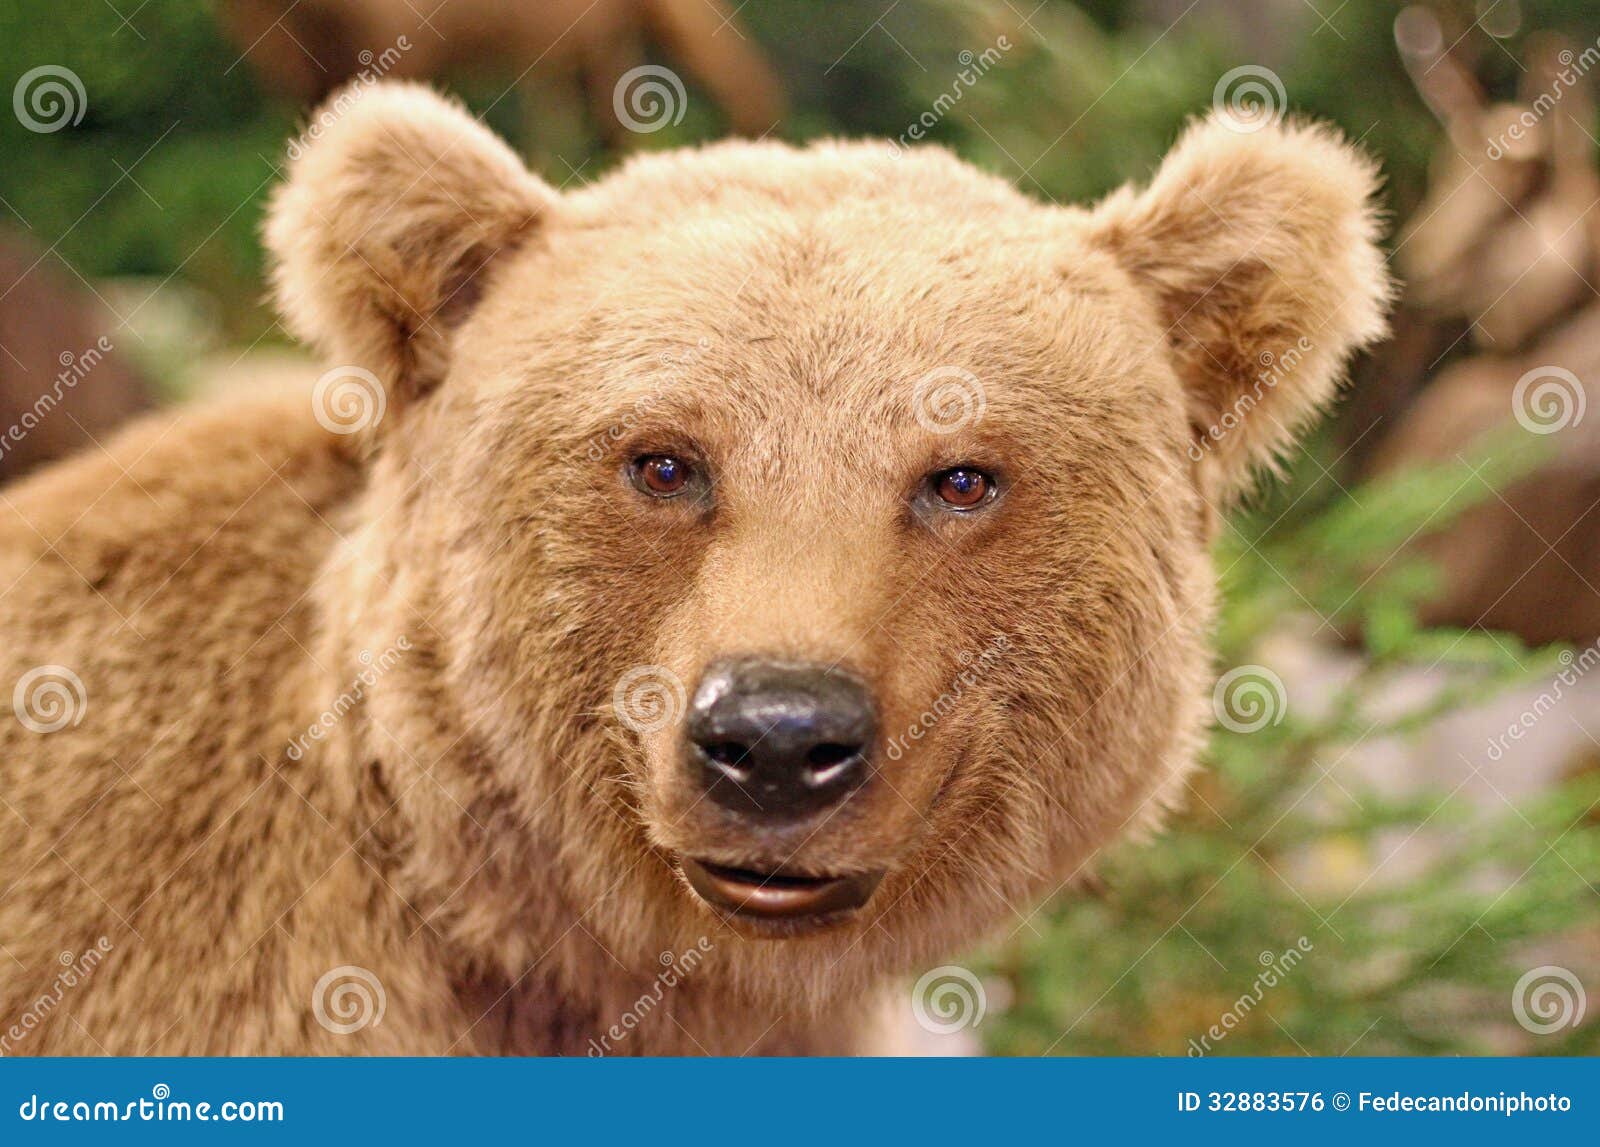 Cute face of a brown bear in the middle of the forests